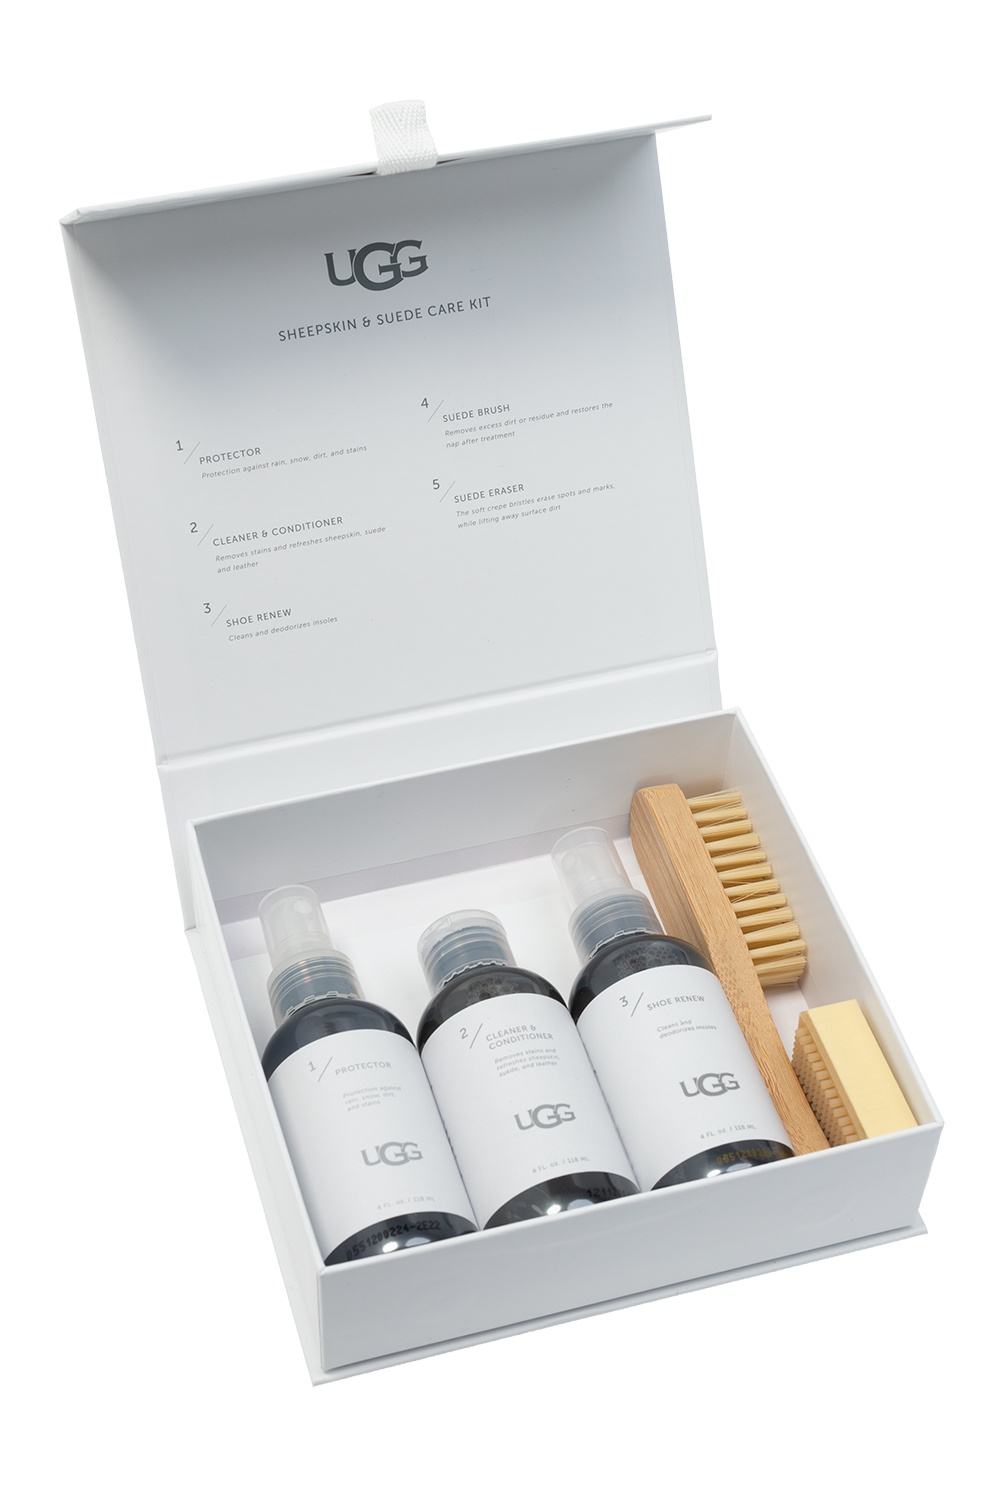 ugg sheepskin and suede care kit